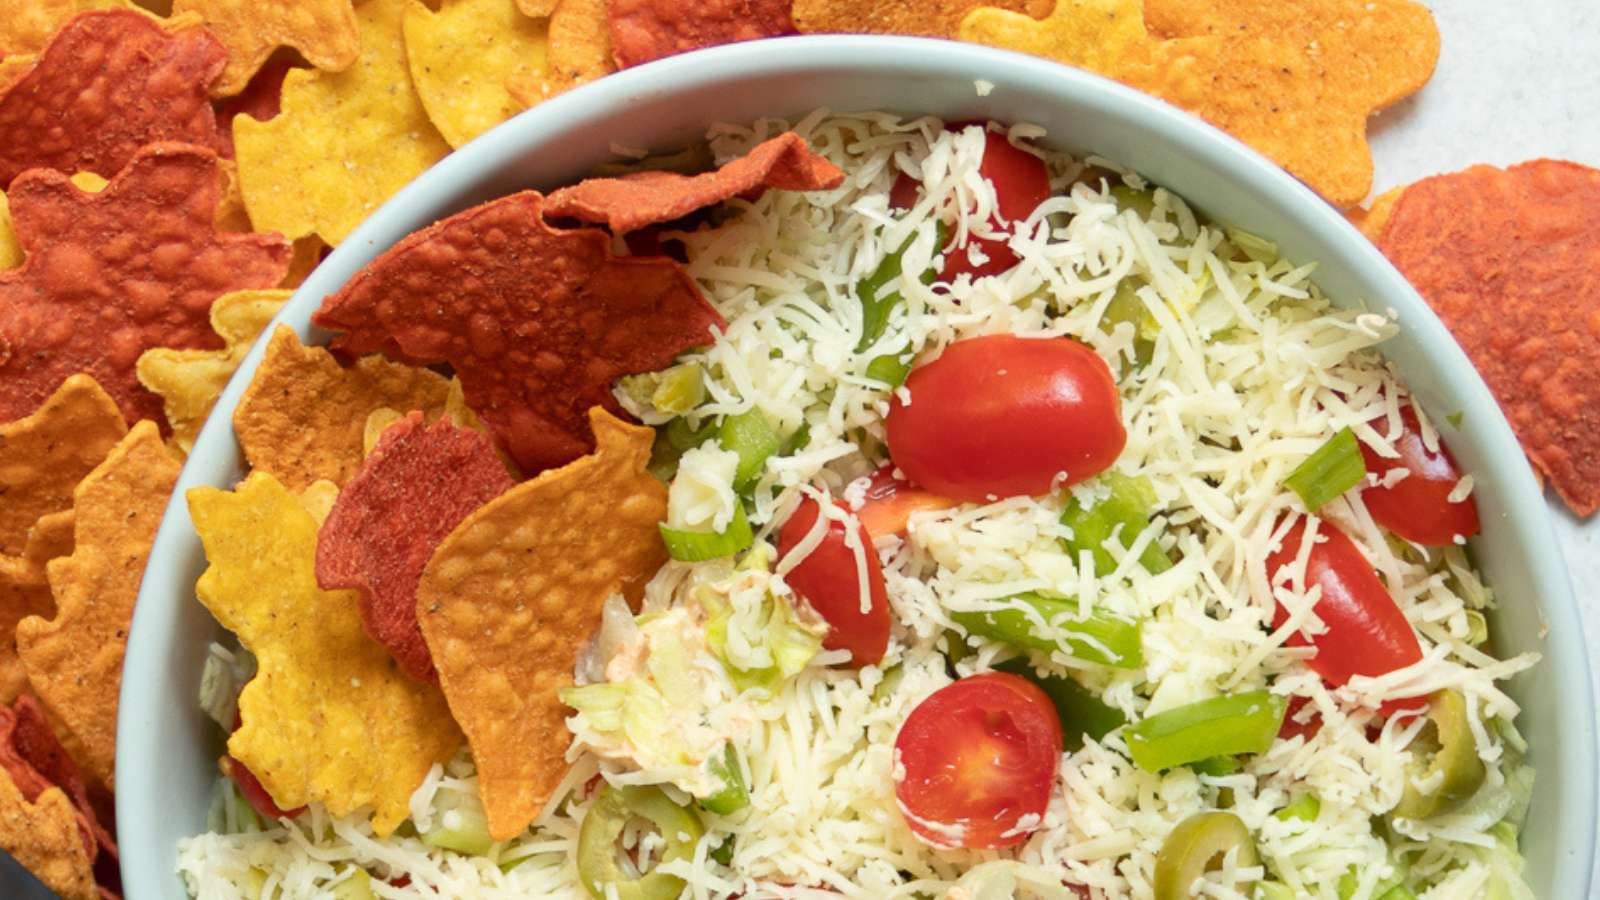 A bowl of cheese and vegetable dip with tortilla chips.